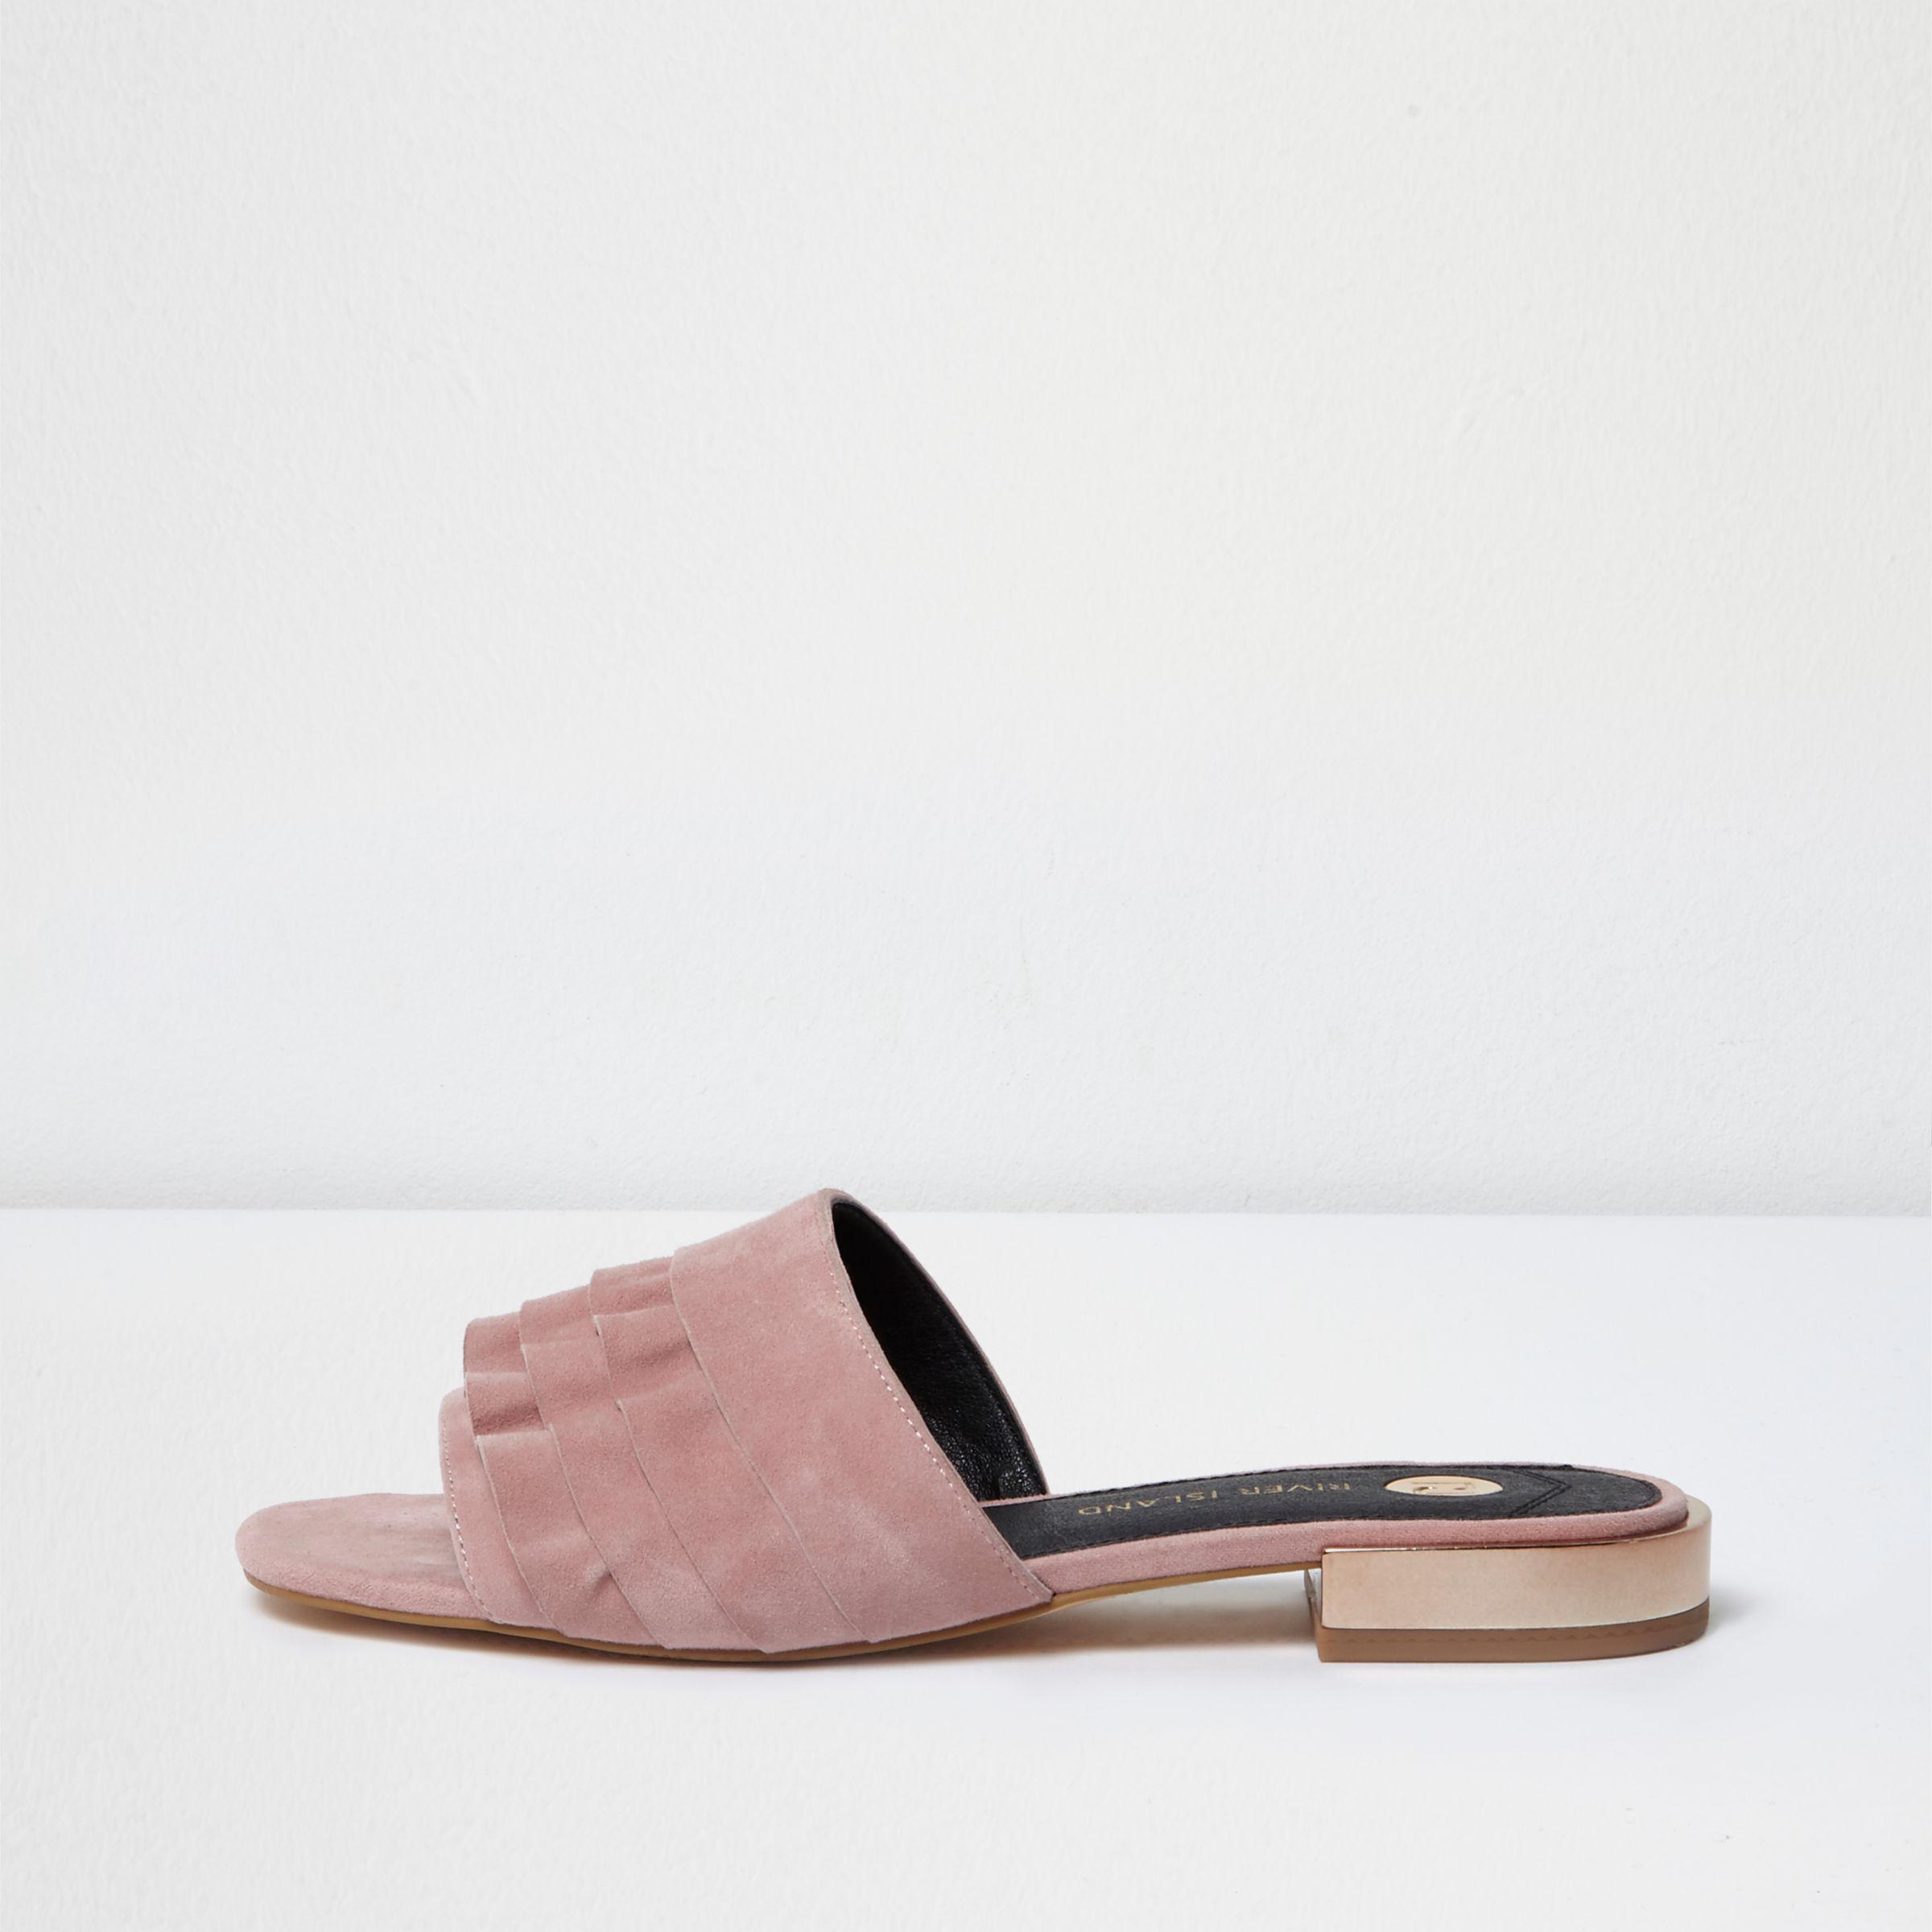 River Island Light Suede Frill Mules in Pink - Lyst